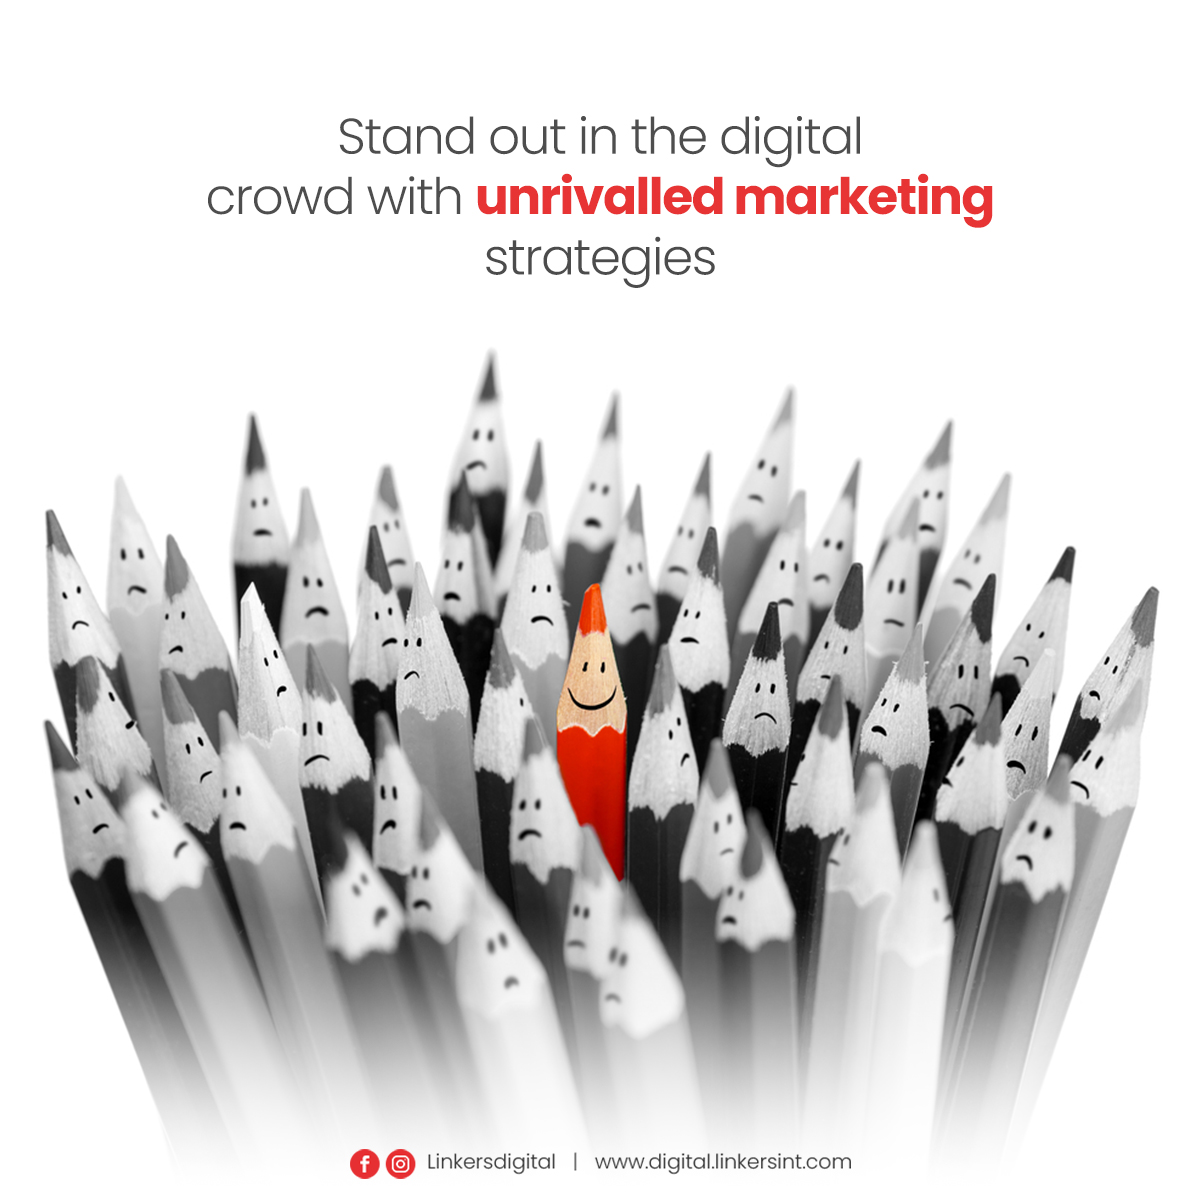 Make a statement in the digital crowd with linkers digital innovative marketing techniques. Allow our knowledgeable team to enhance your online presence, engage your audience, and produce outstanding results. With the help of our top-notch digital services, elevate your brand.